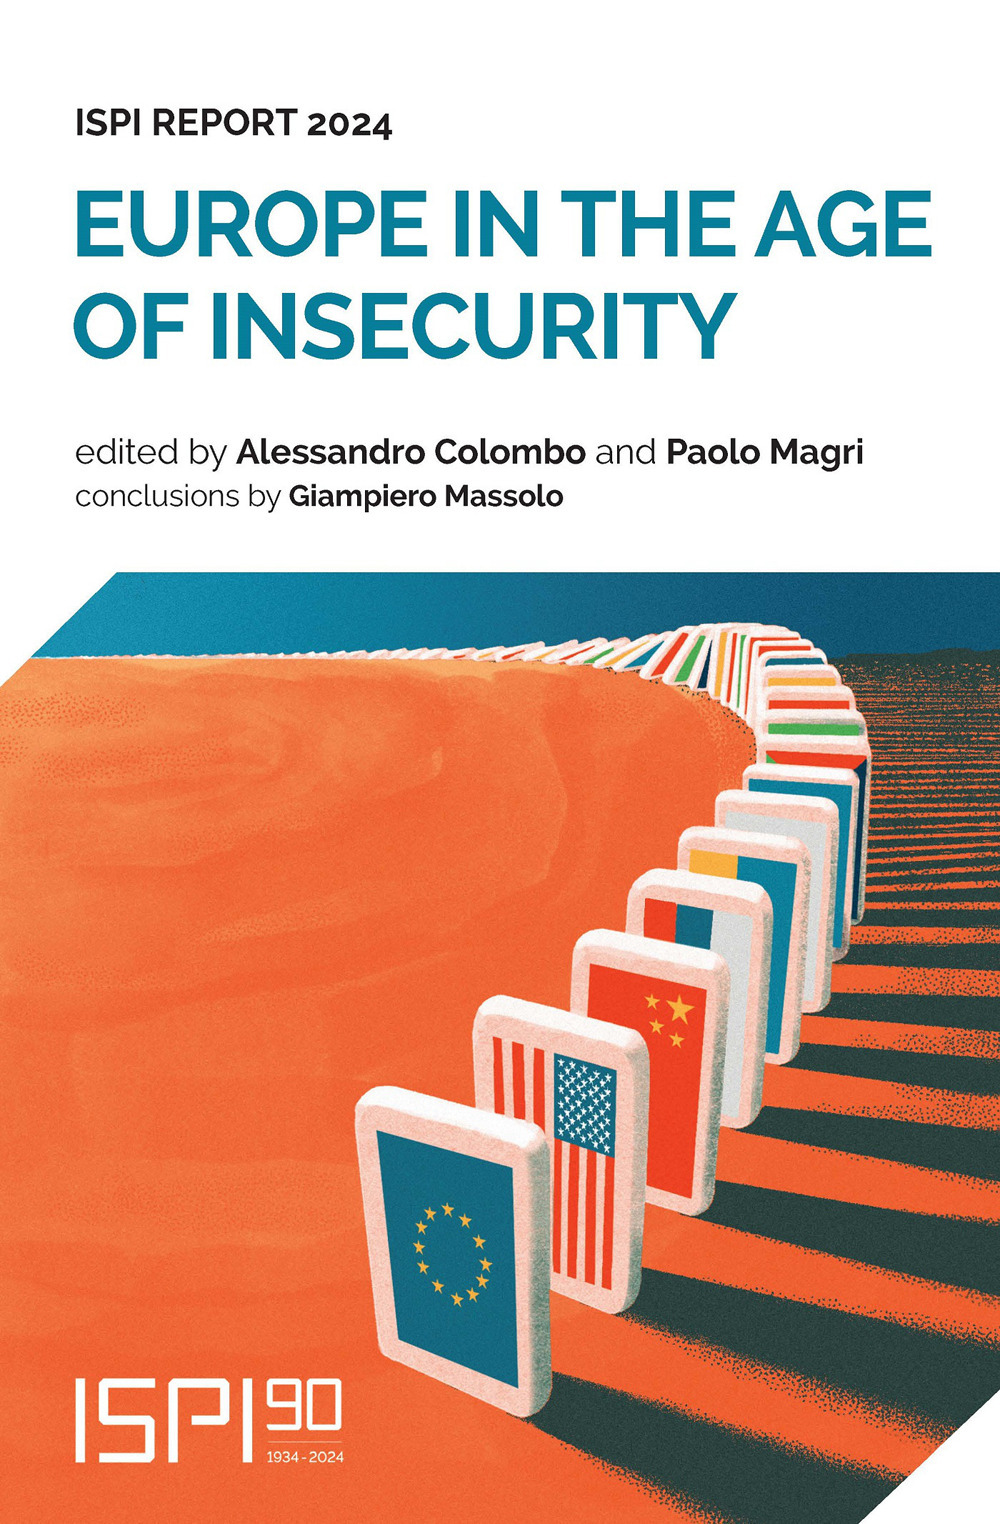 Europe in the age of insecurity. Ispi report 2024